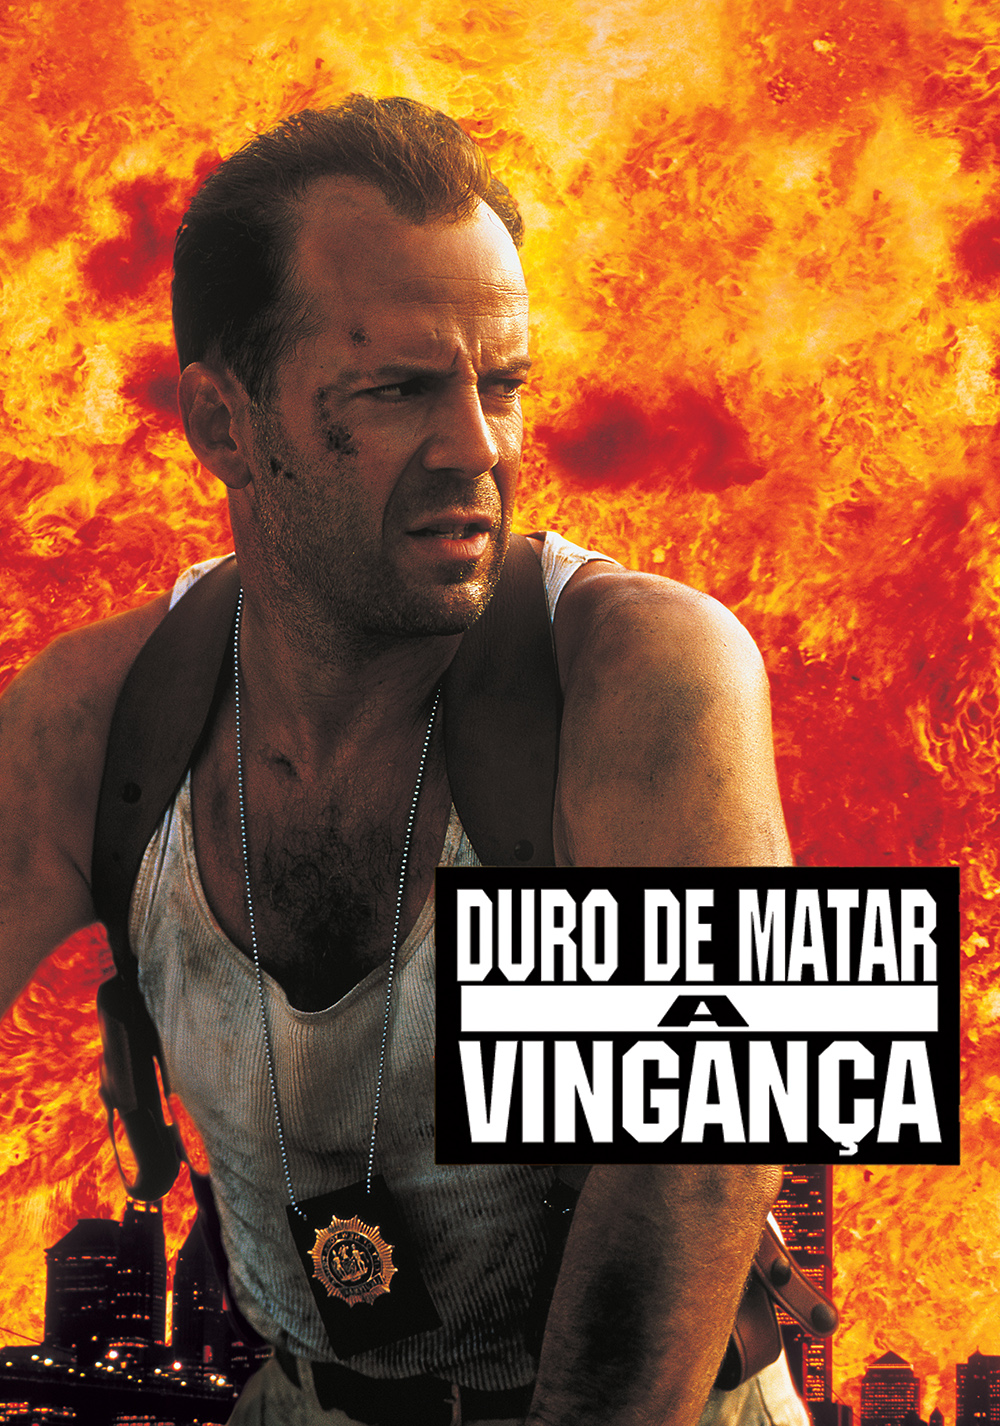 Die Hard with a Vengeance Art